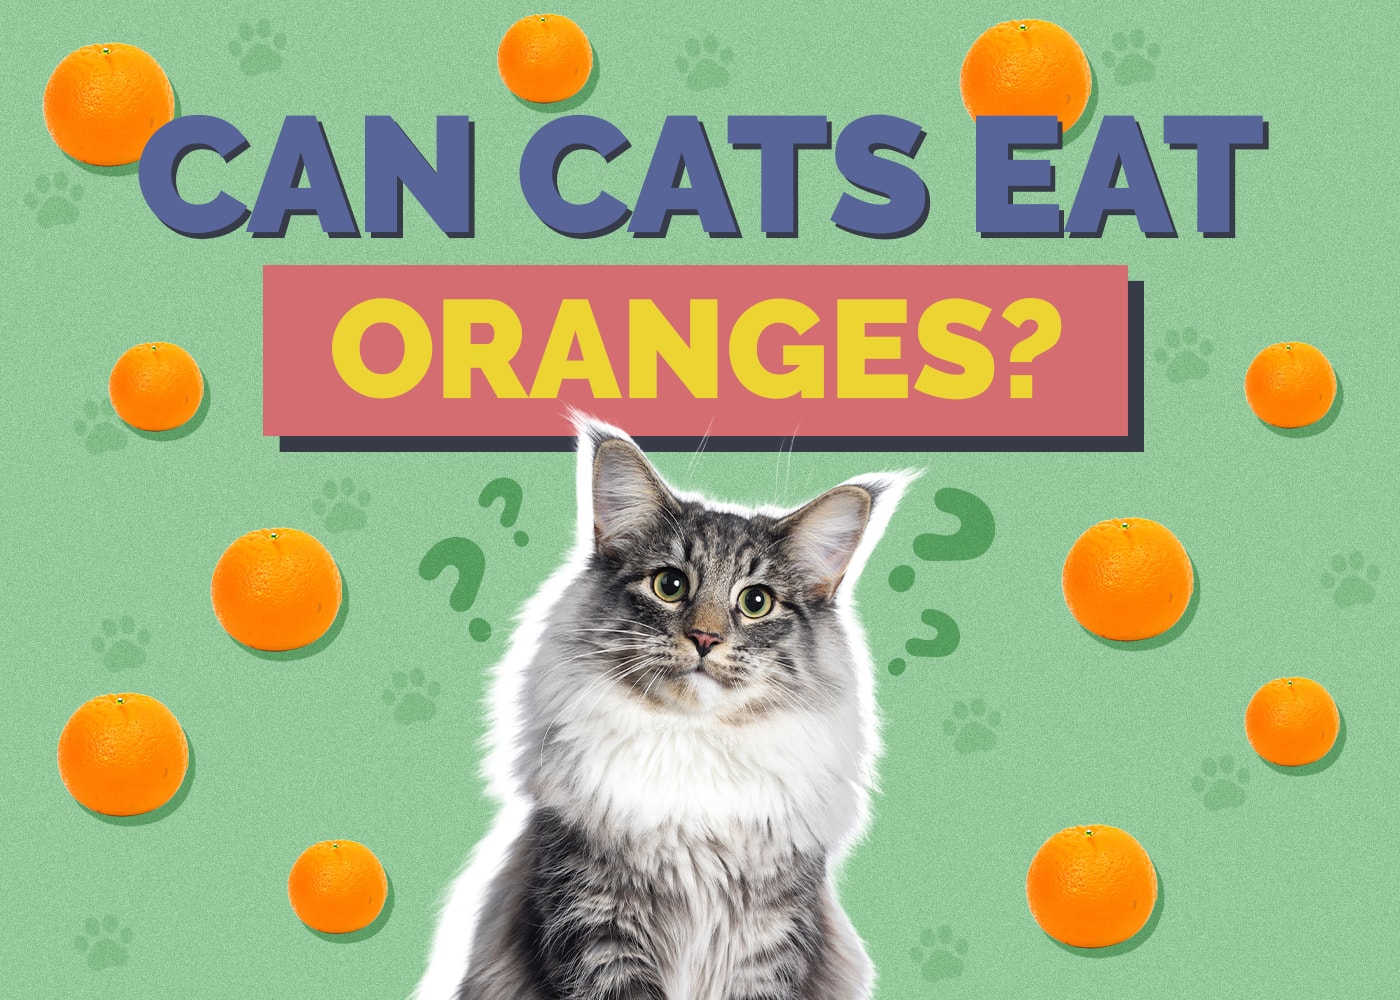 Can Cats Eat oranges